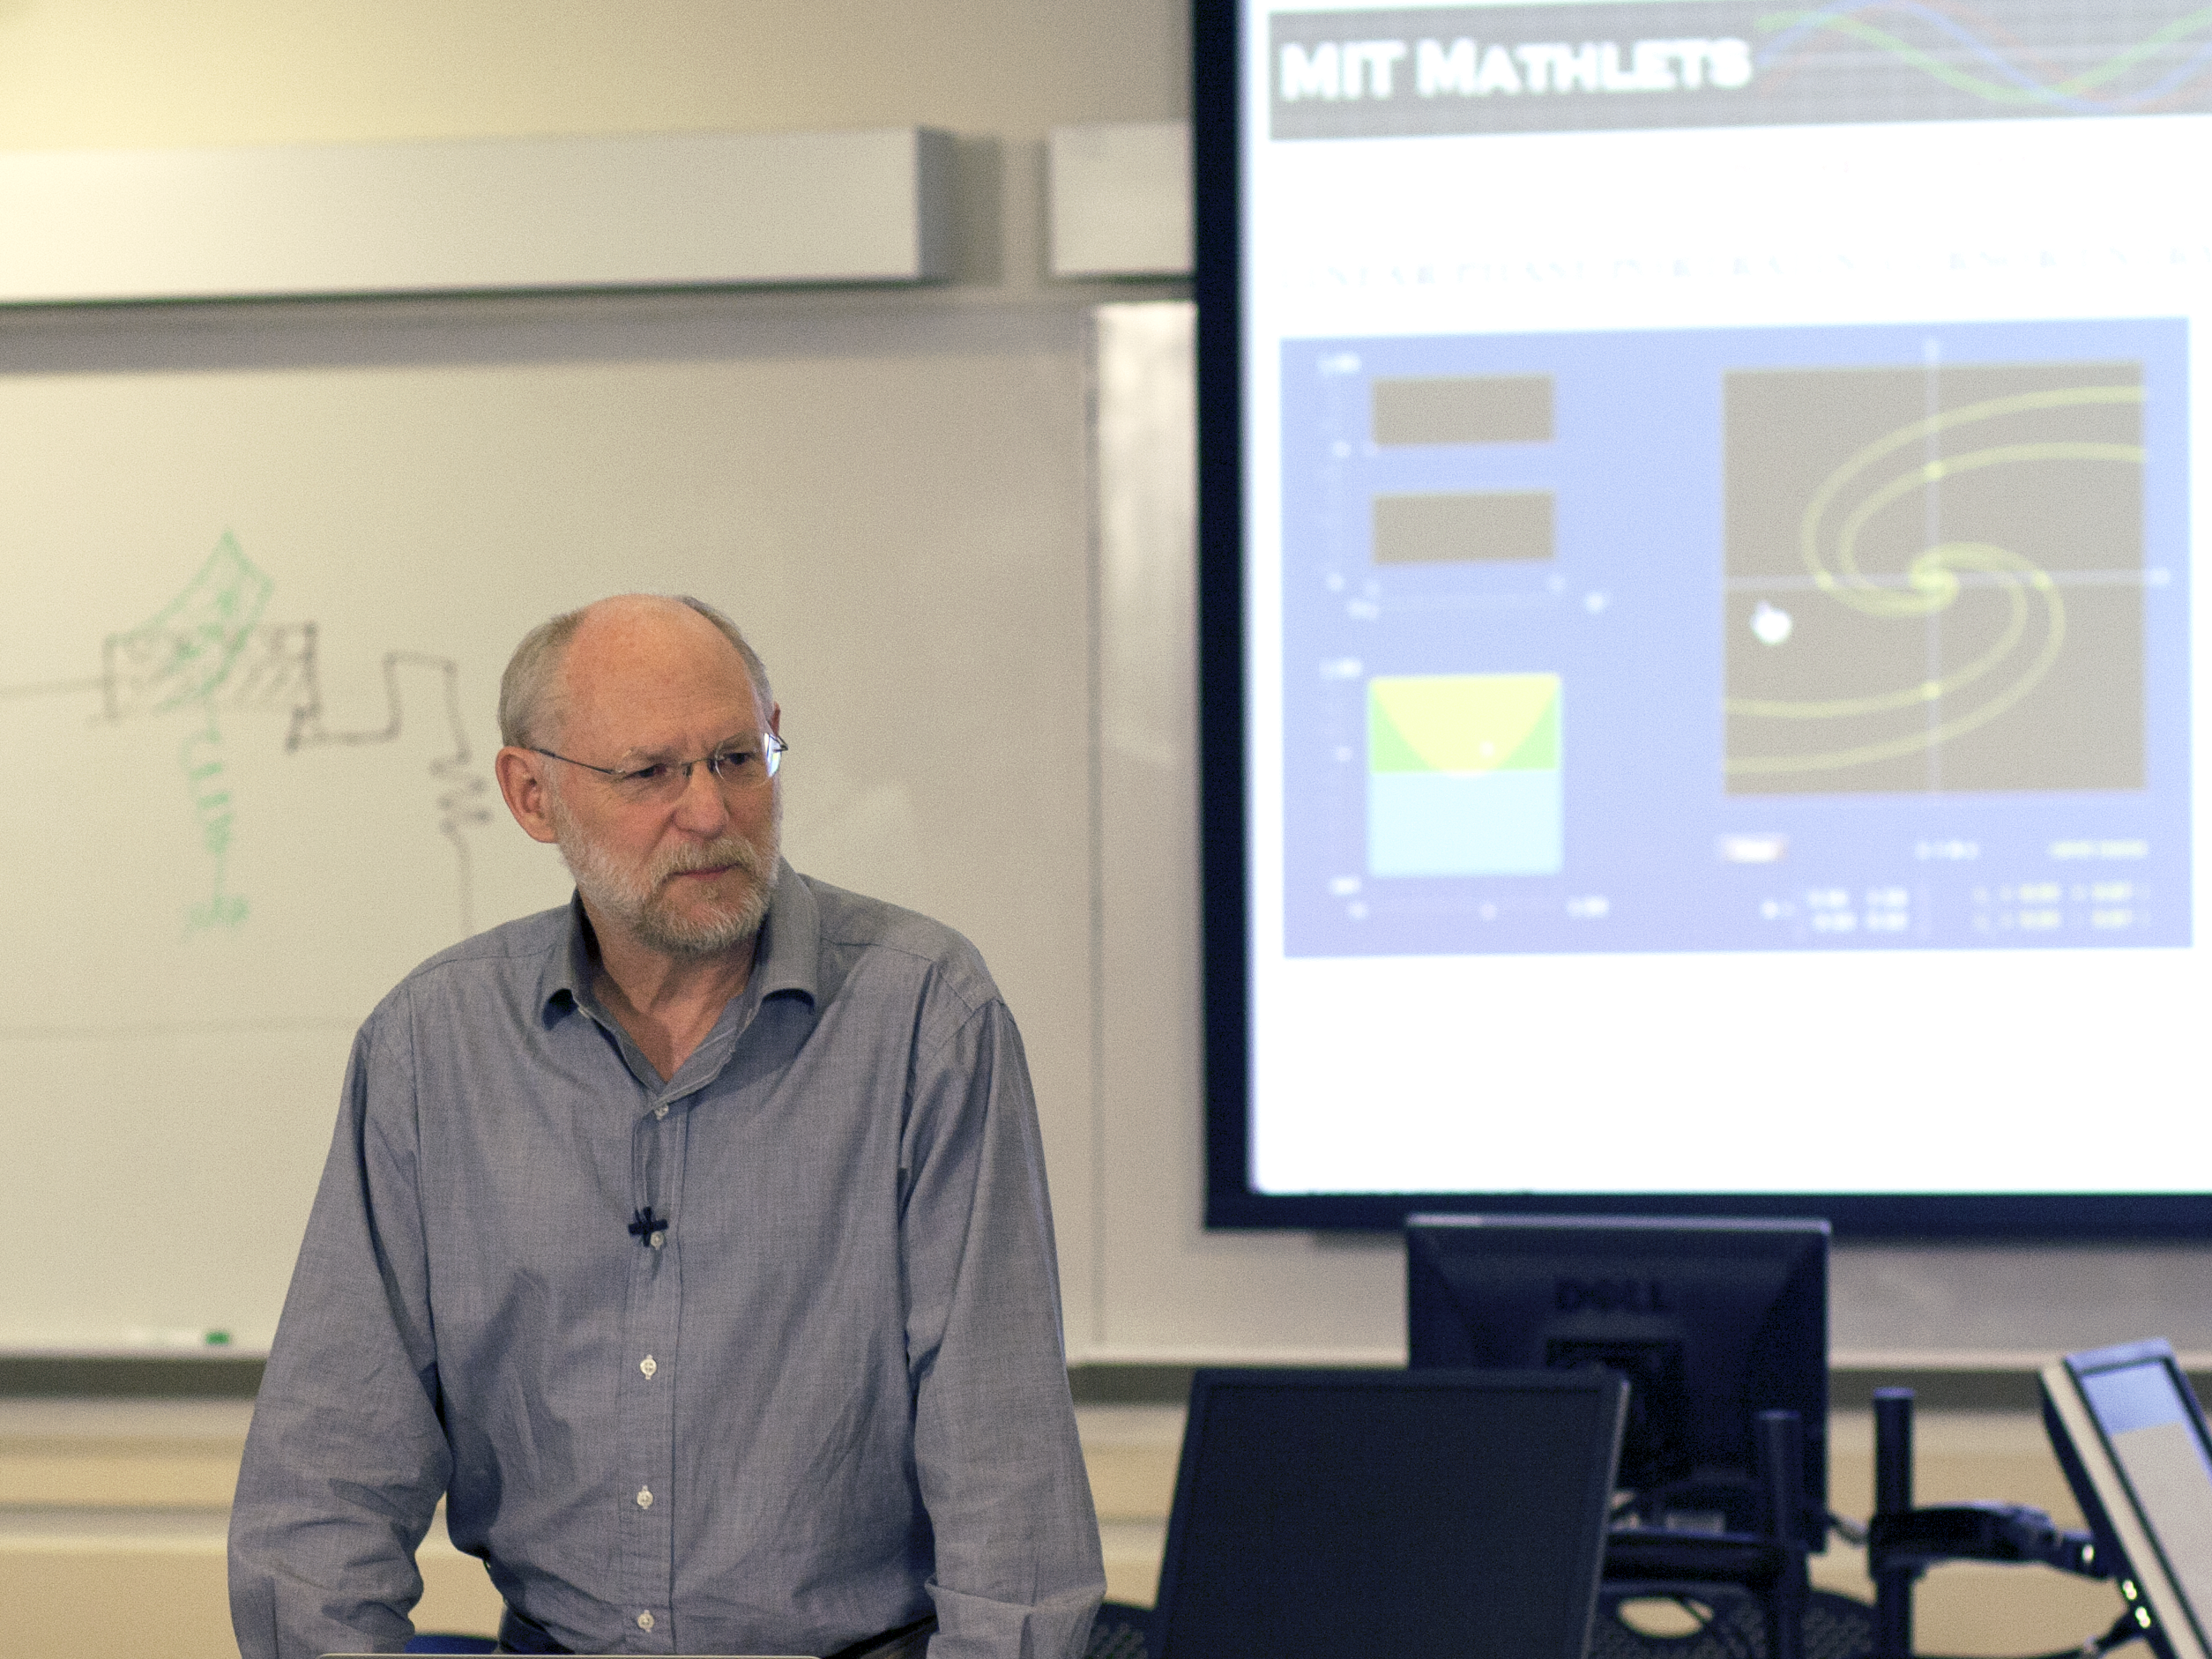 Photo of Haynes Miller lecturing with Mathlet in background